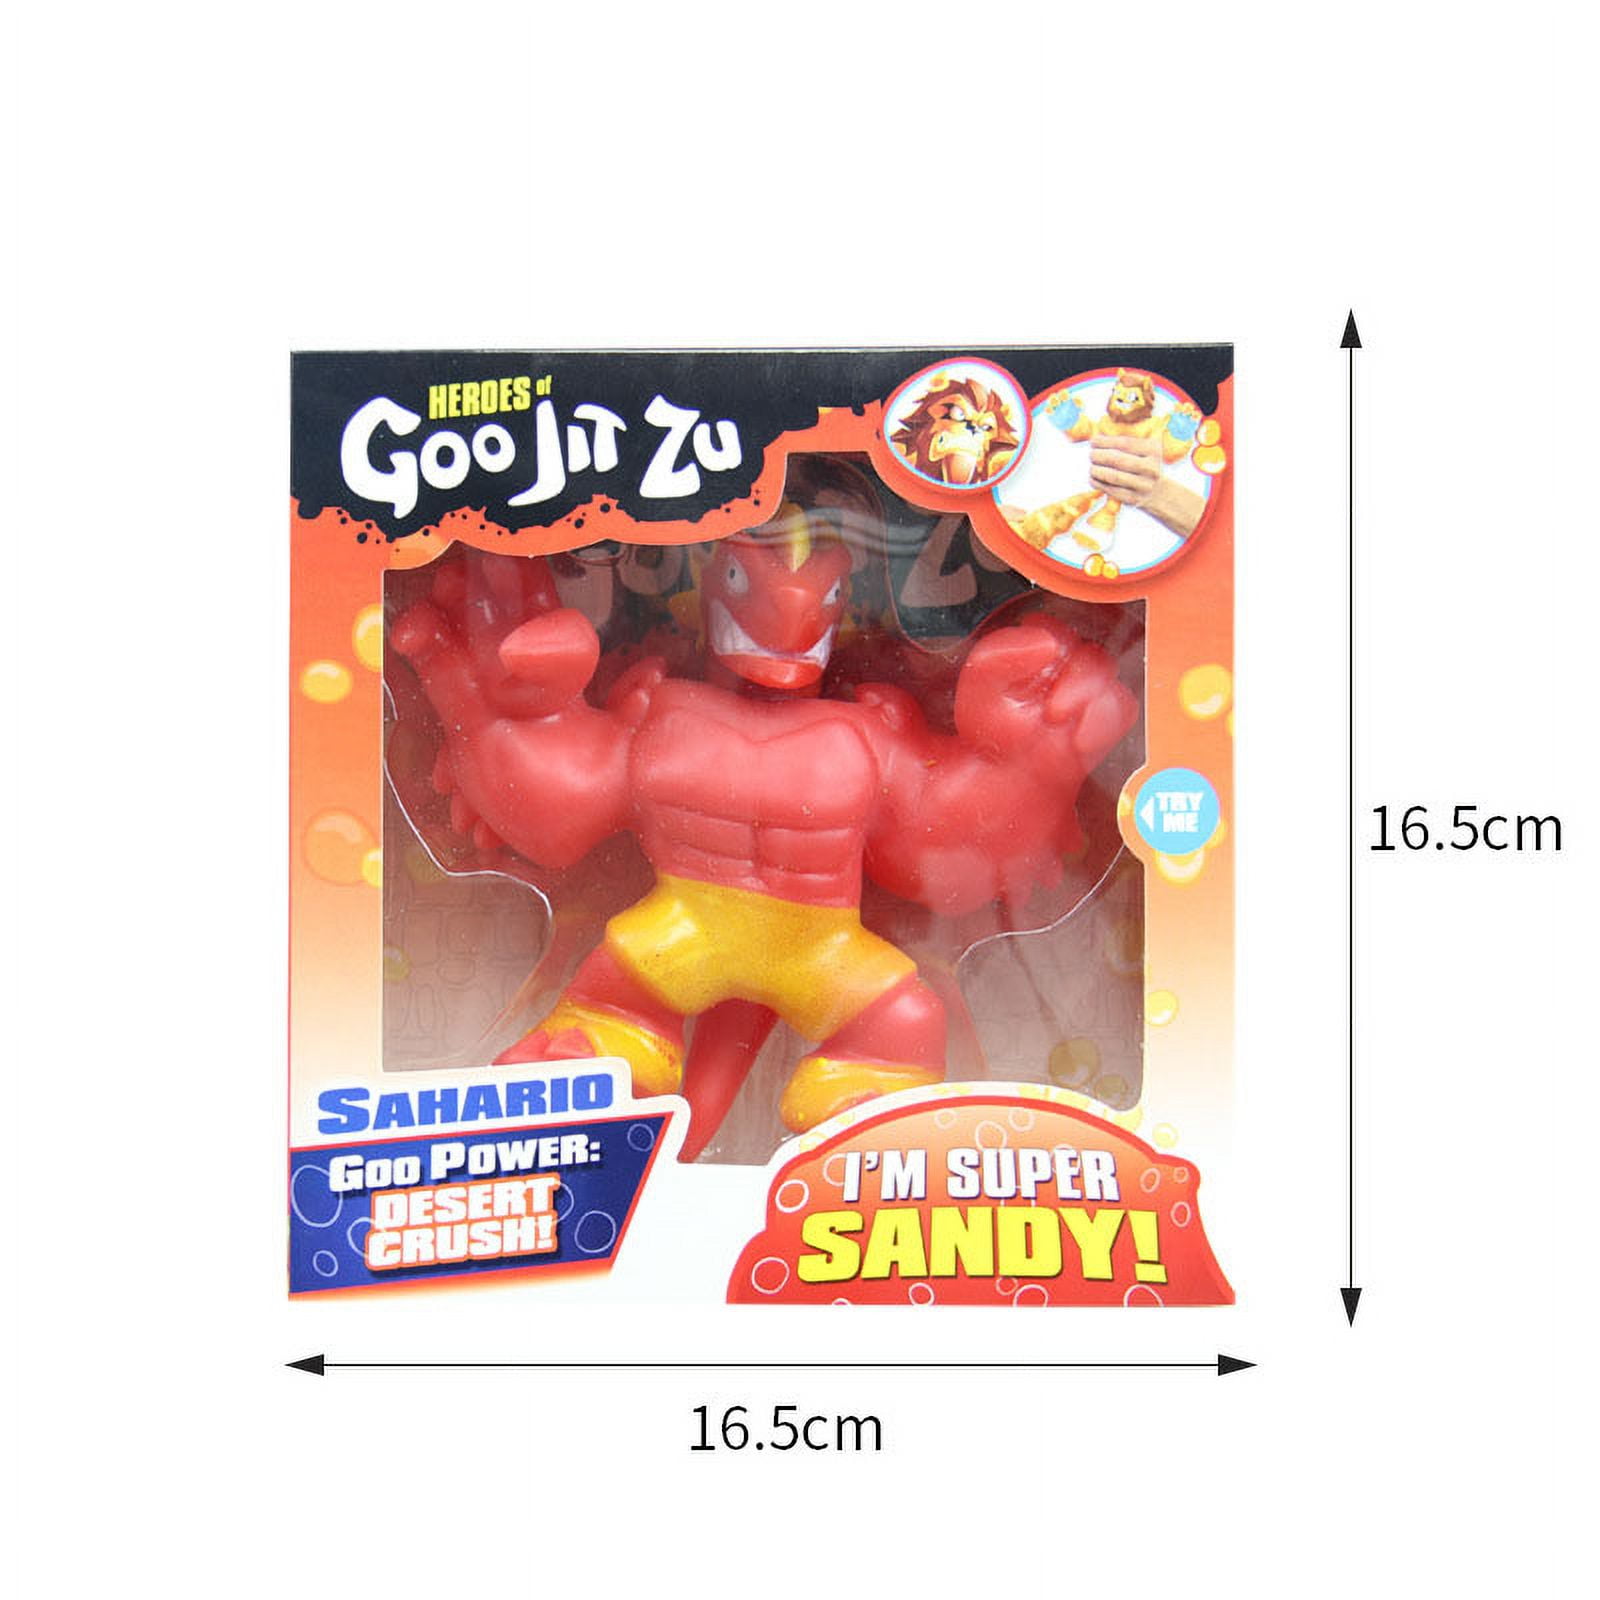 Space Jam Heroes of Goo JIT Zu A New Legacy - 5 Stretchy Goo Filled Action  Figure - Lebron James - US